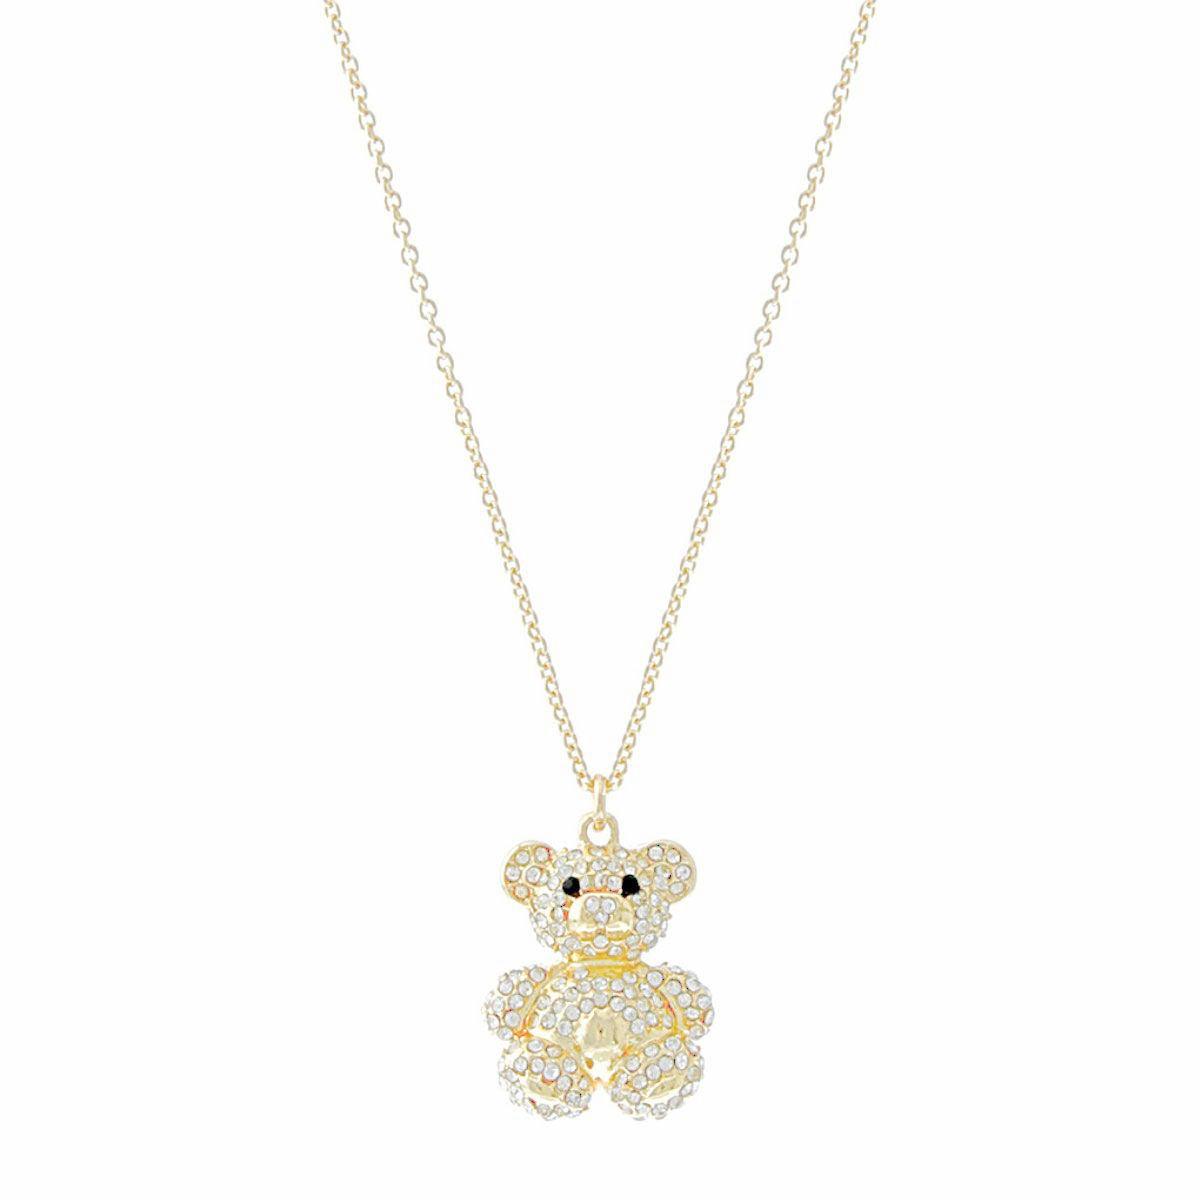 Get Cute with a Gold Teddy Bear Necklace - Perfect Shine & Style for Women